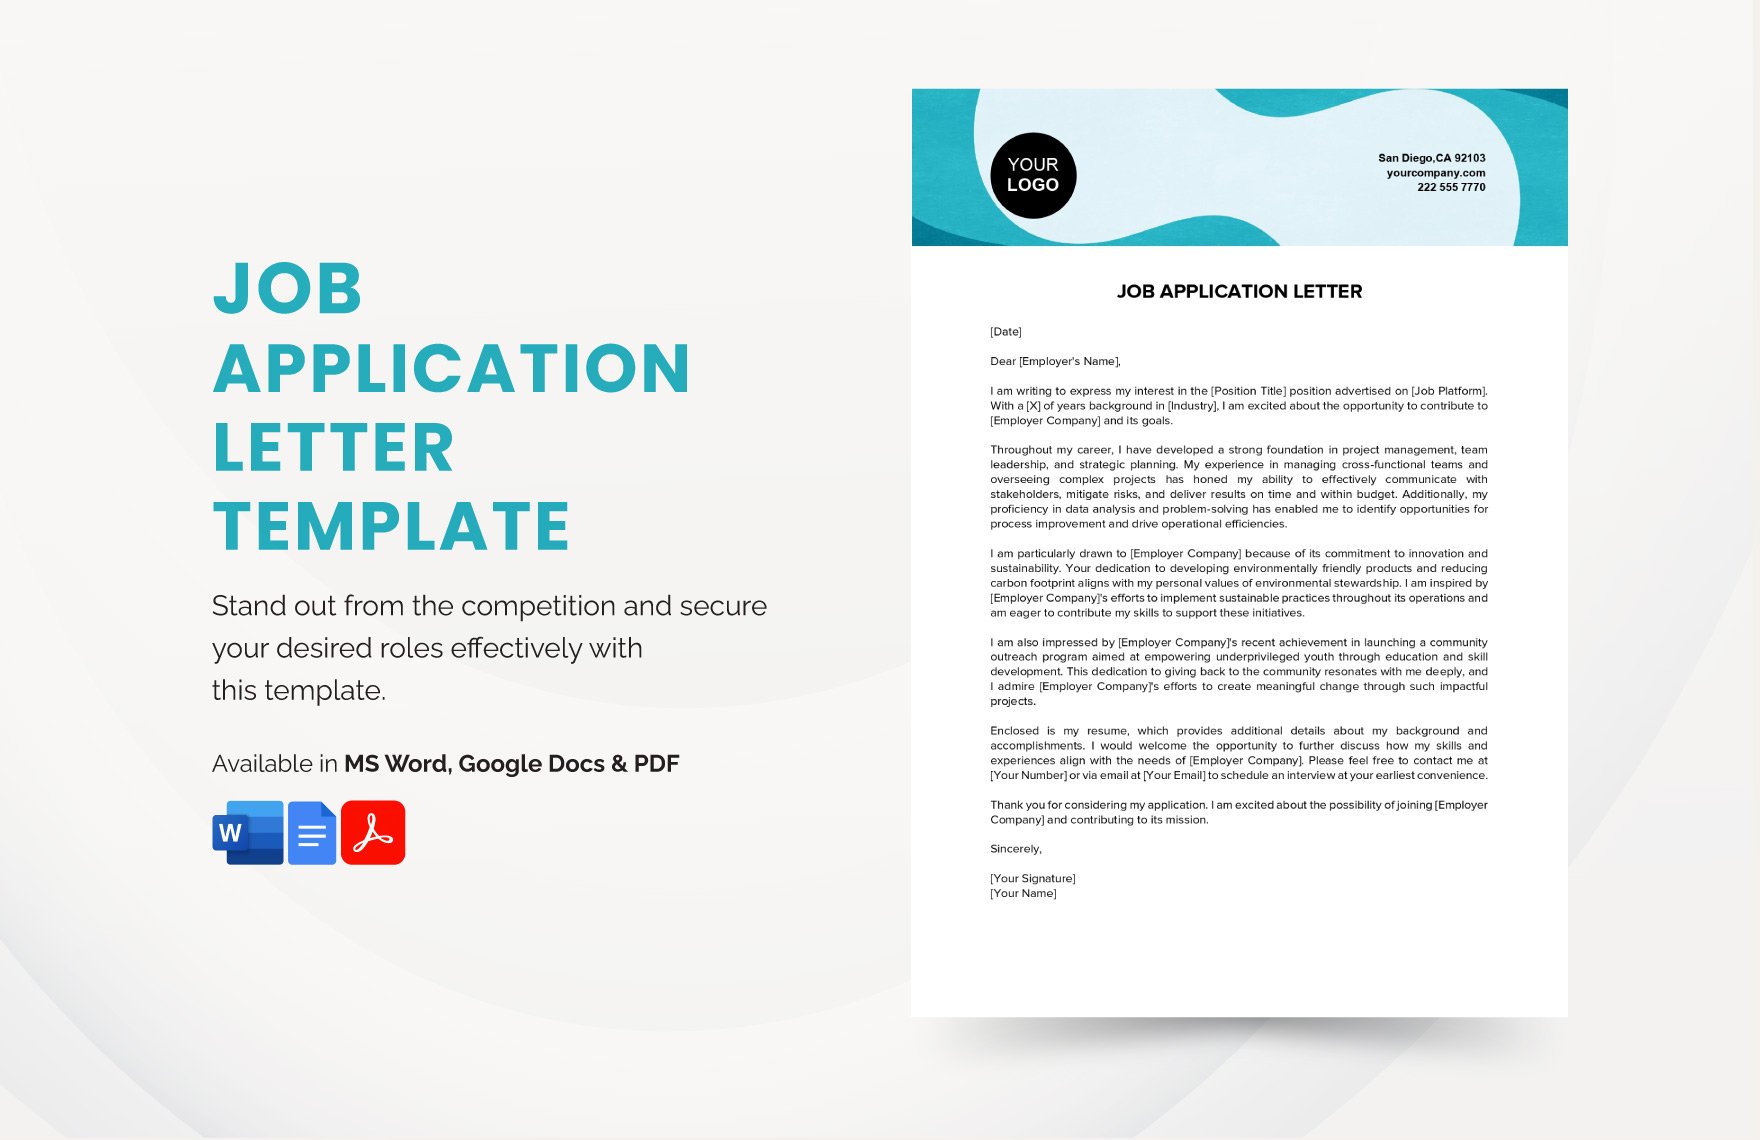 Job Application Letter Template in Word, Google Docs, PDF